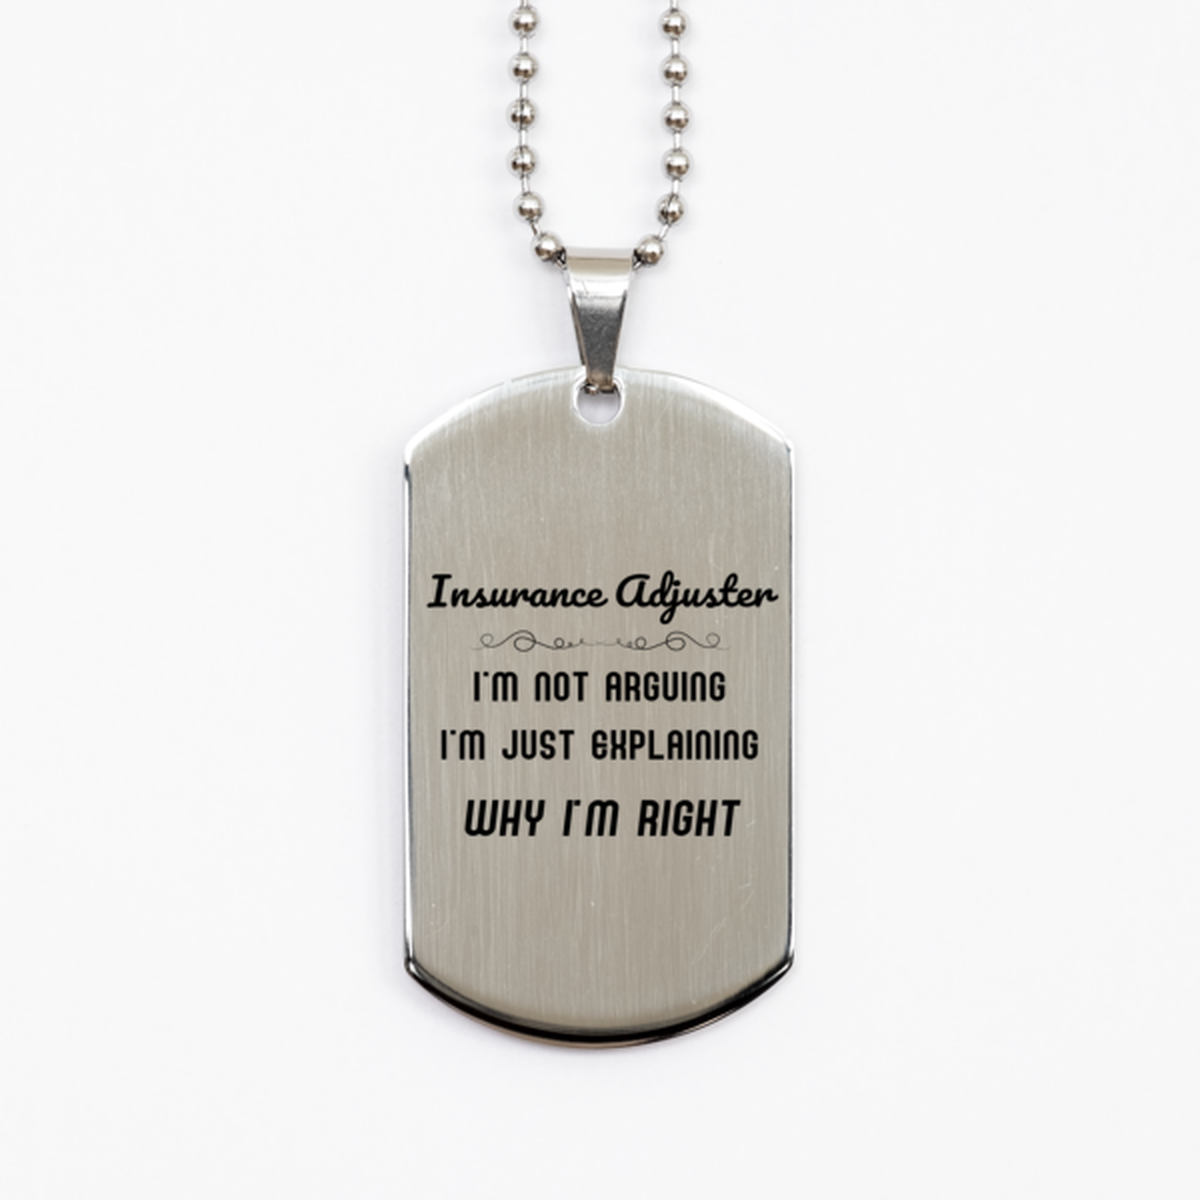 Insurance Adjuster I'm not Arguing. I'm Just Explaining Why I'm RIGHT Silver Dog Tag, Funny Saying Quote Insurance Adjuster Gifts For Insurance Adjuster Graduation Birthday Christmas Gifts for Men Women Coworker